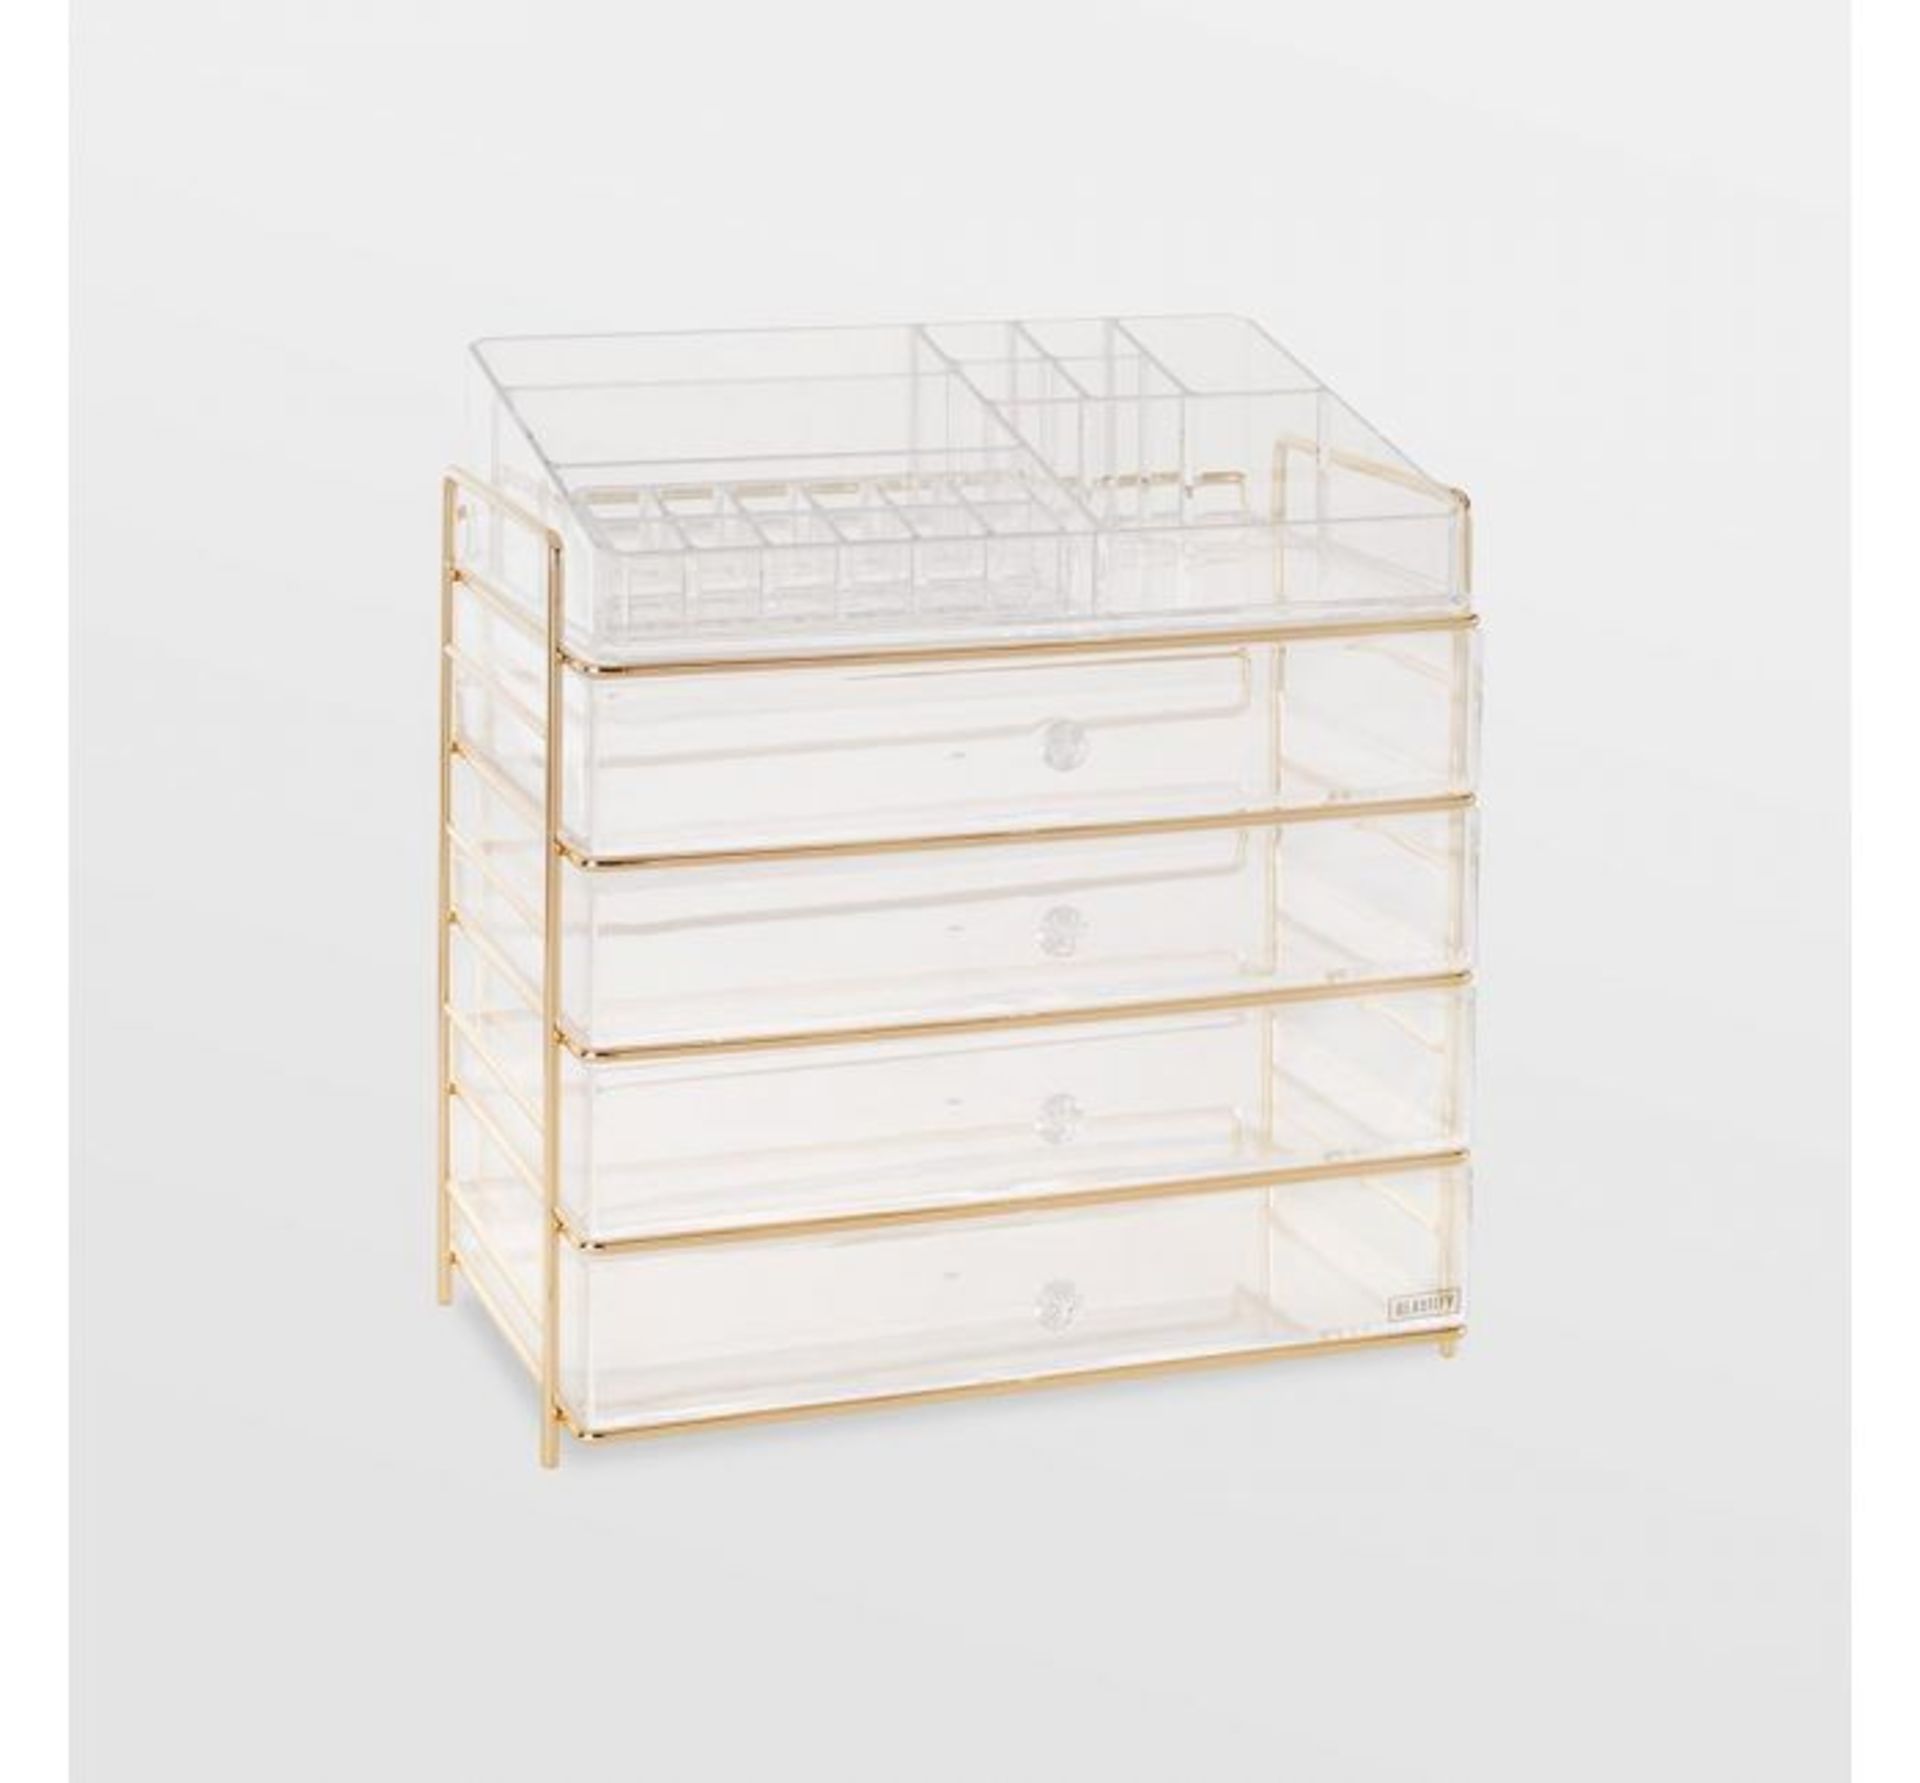 (OM40) 5 Tier Cosmetic Organiser The 5 tier display features 4 large removable drawers with ... - Image 2 of 3